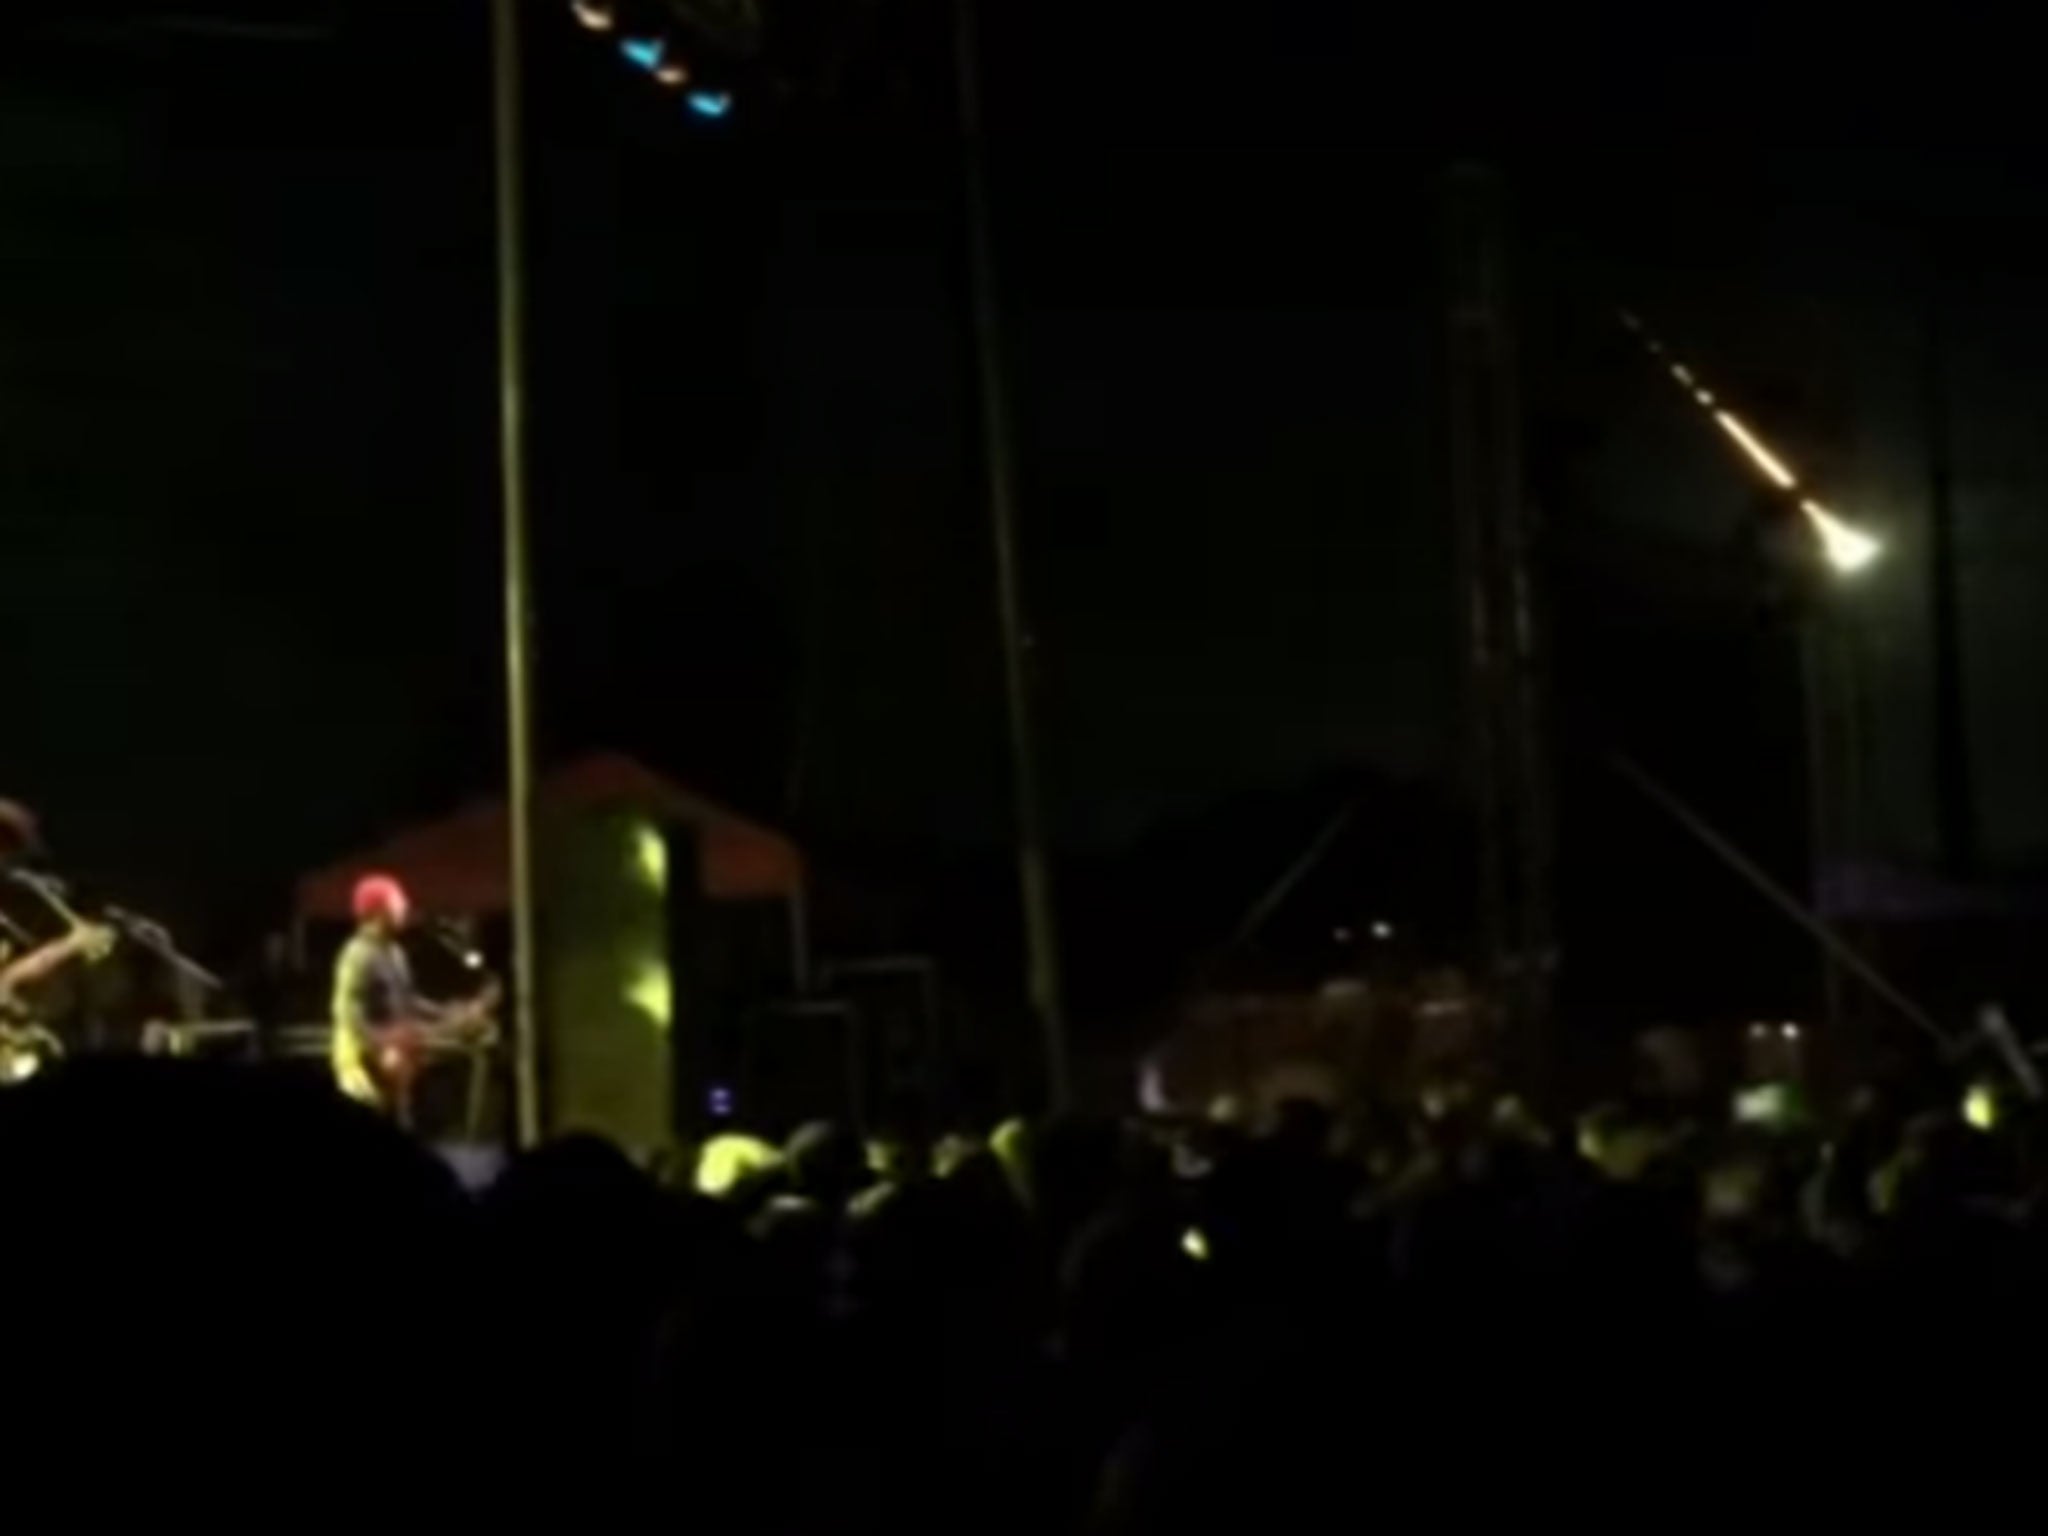 The fireball was caught while the band played at the Fun Fun Fun Fest music festival in Austin on Saturday